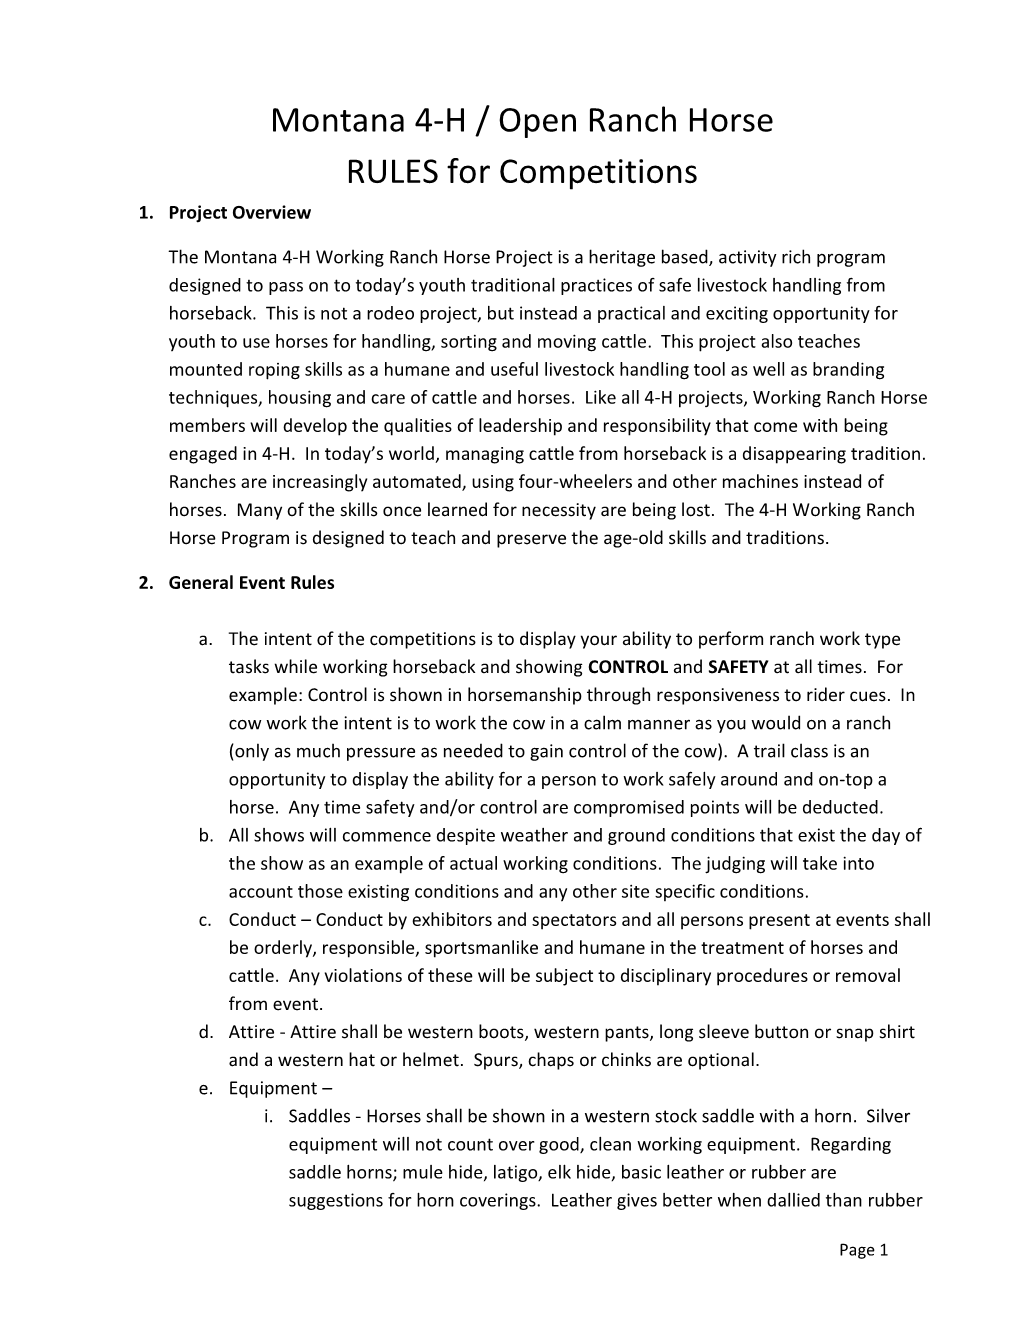 Montana 4-H / Open Ranch Horse RULES for Competitions 1